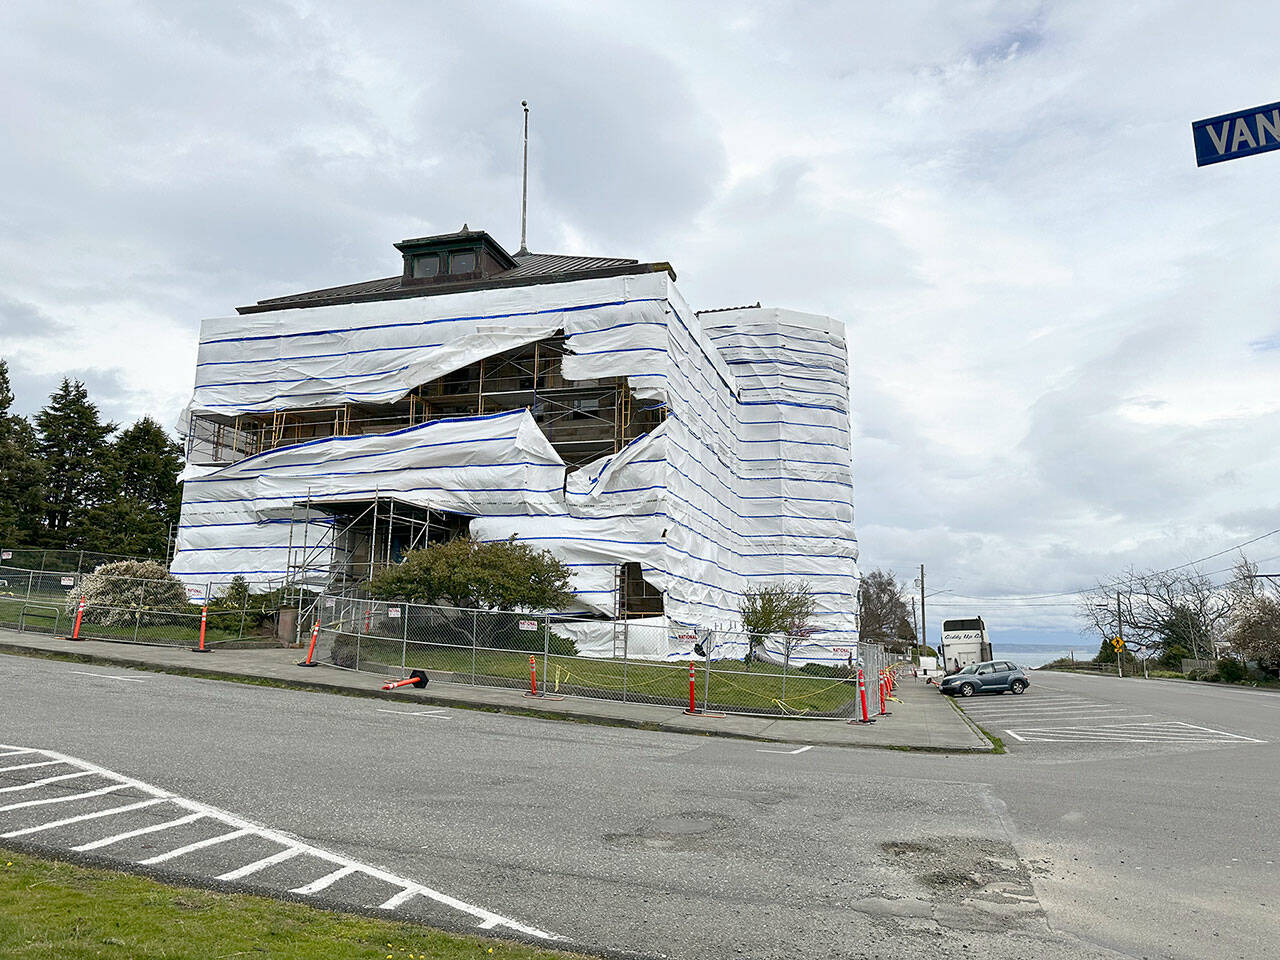 The post office building in Port Townsend, covered with protective plastic while undergoing renovation work, is buffeted by gale force winds on Sunday strong enough to rip the covering. (Steve Mullensky/for Peninsula Daily News)